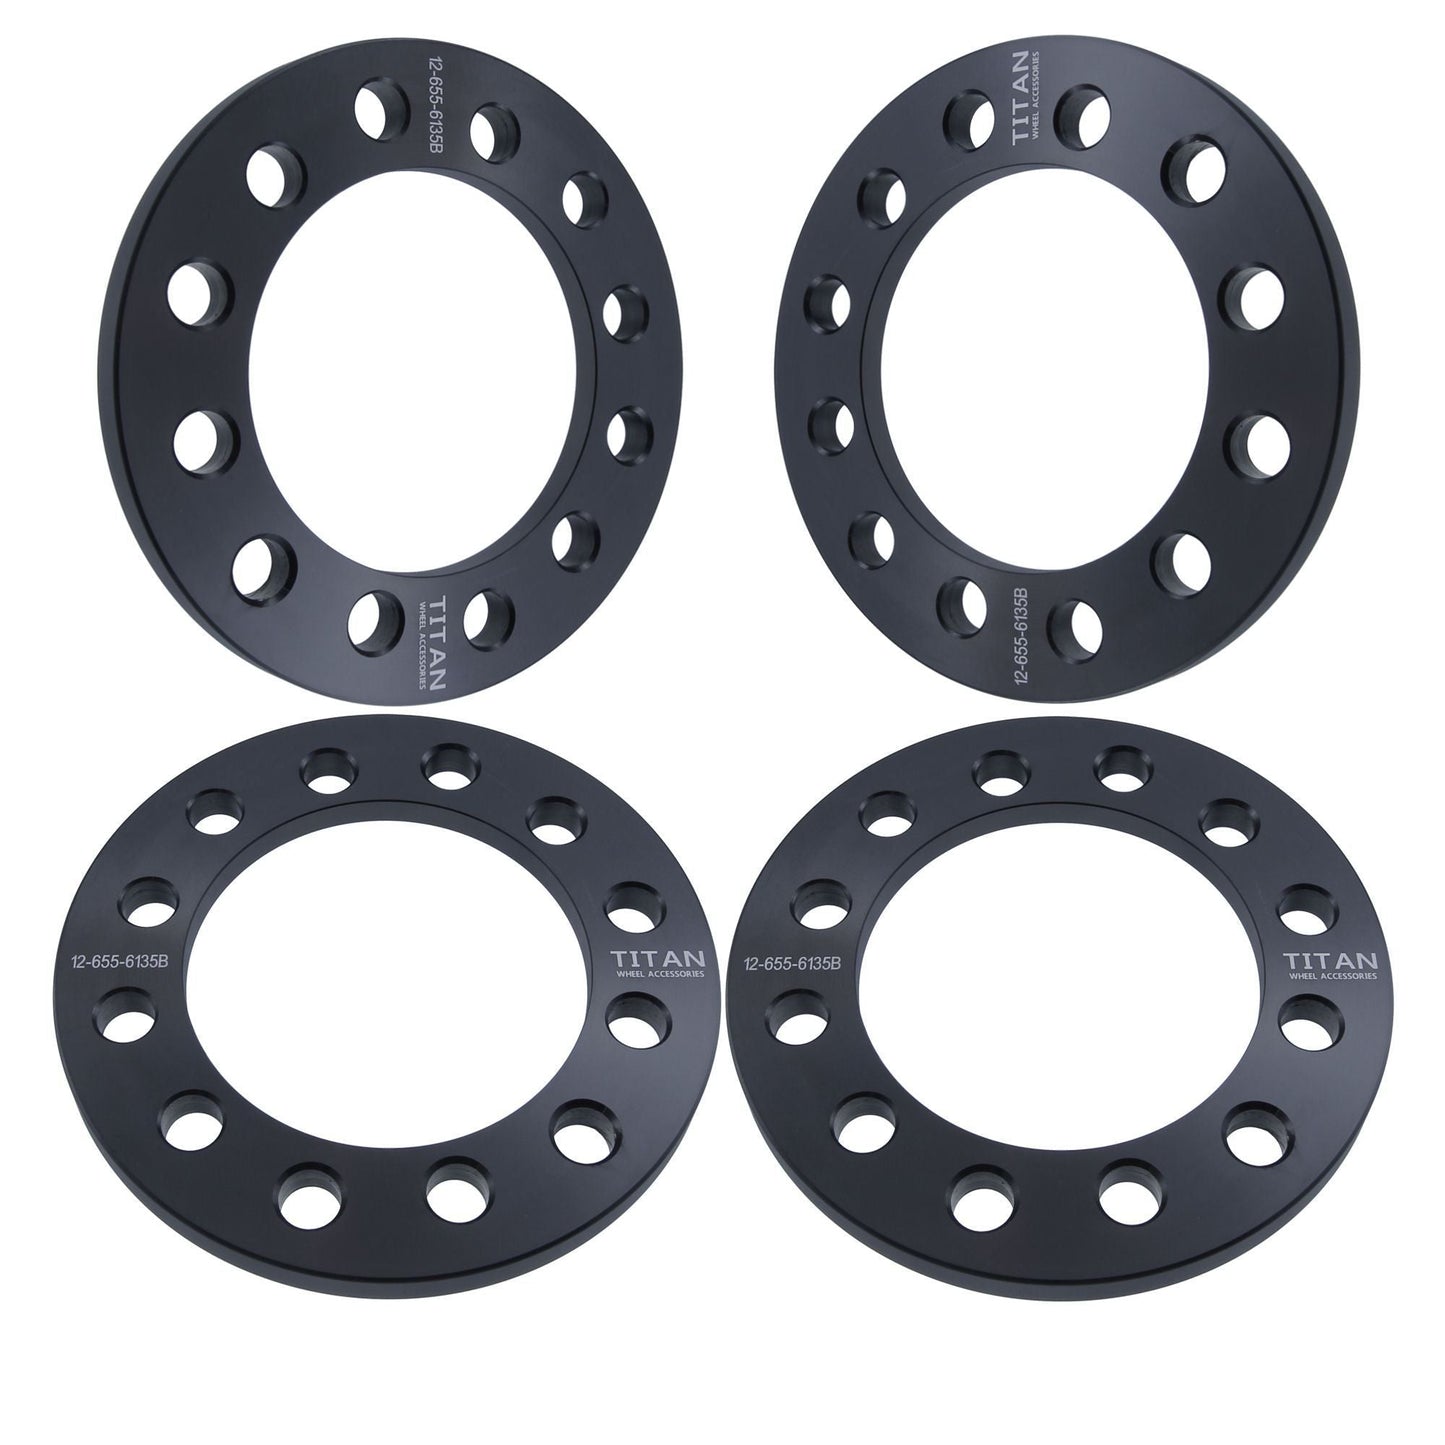 1/2" Titan Wheel Spacers for Ford F-150 Expedition Raptor | 6x135 | Set of 4 | Titan Wheel Accessories